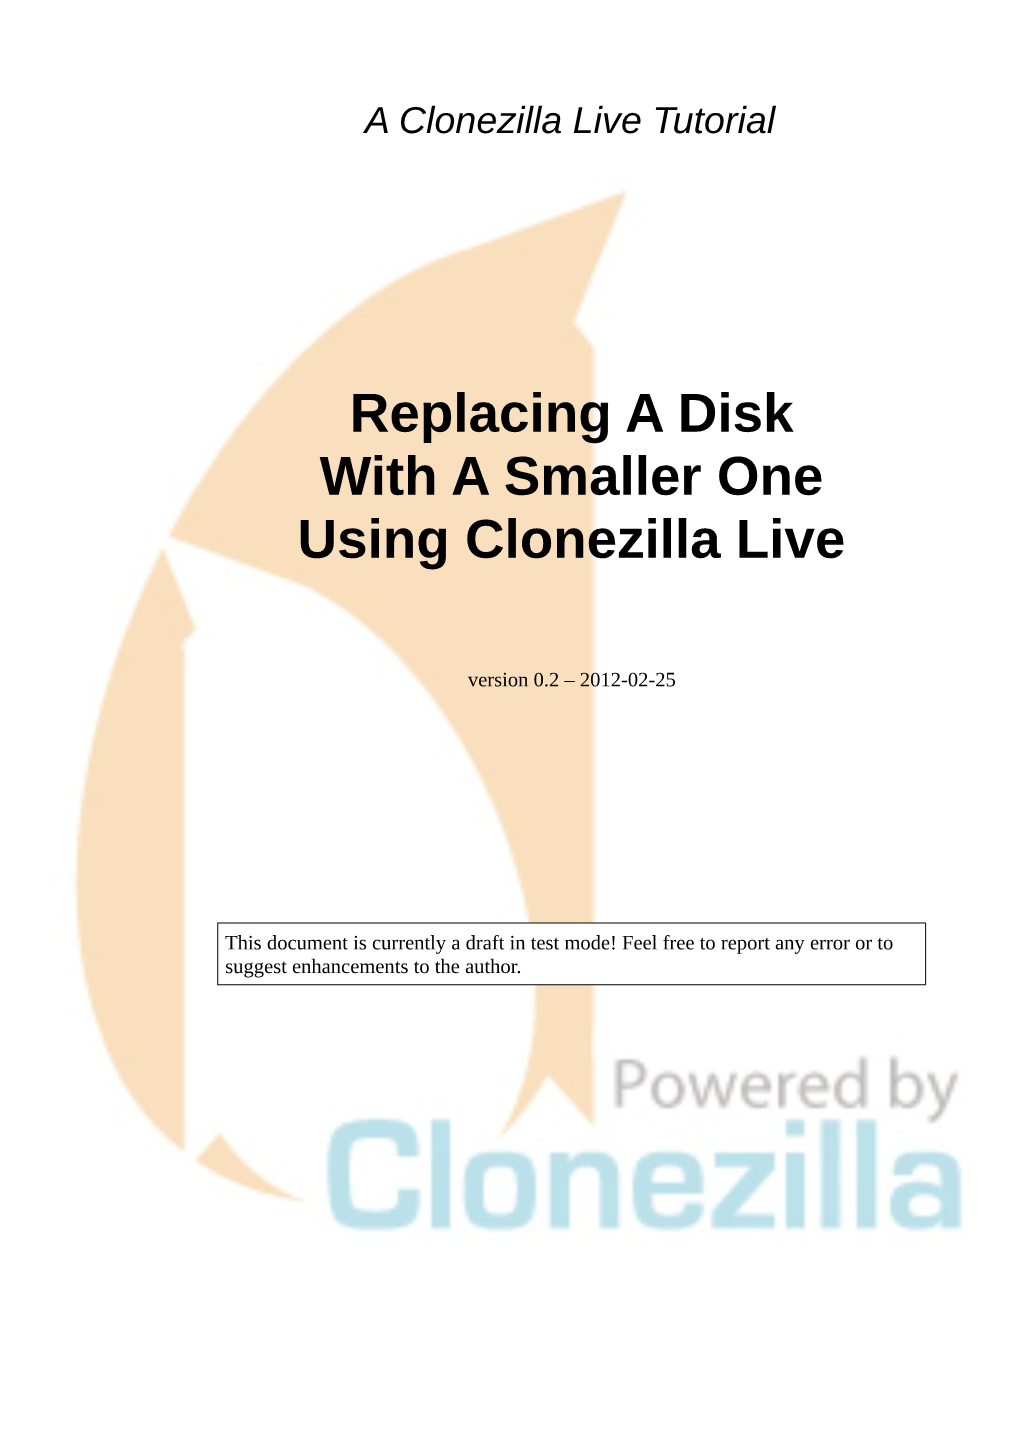 Replacing a Disk with a Smaller One Using Clonezilla Live